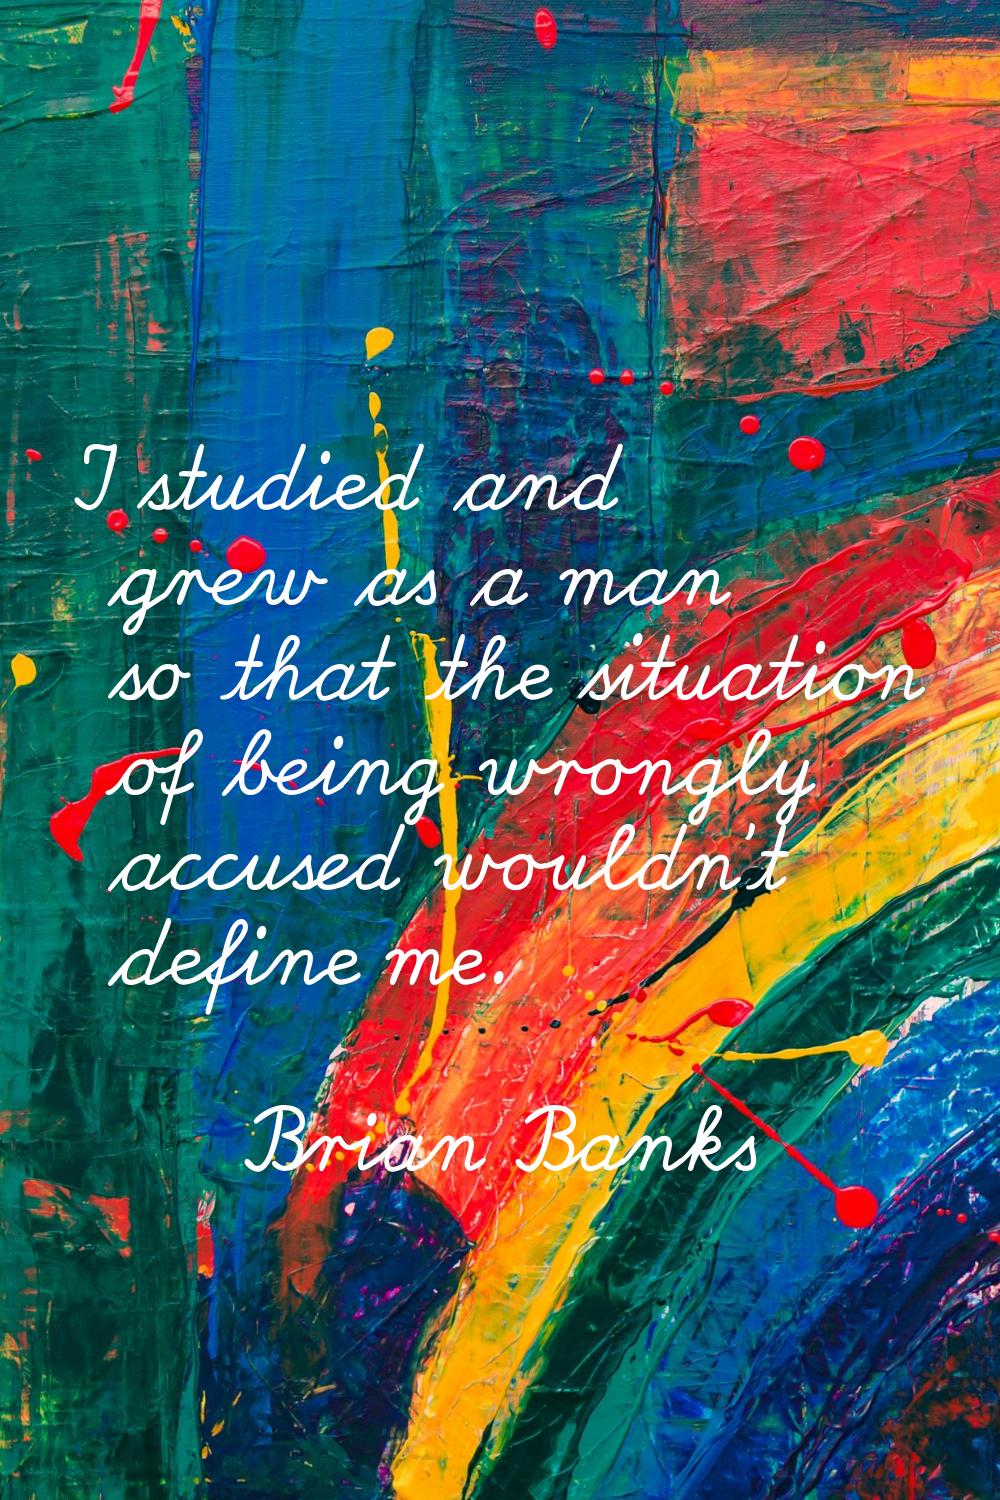 I studied and grew as a man so that the situation of being wrongly accused wouldn't define me.